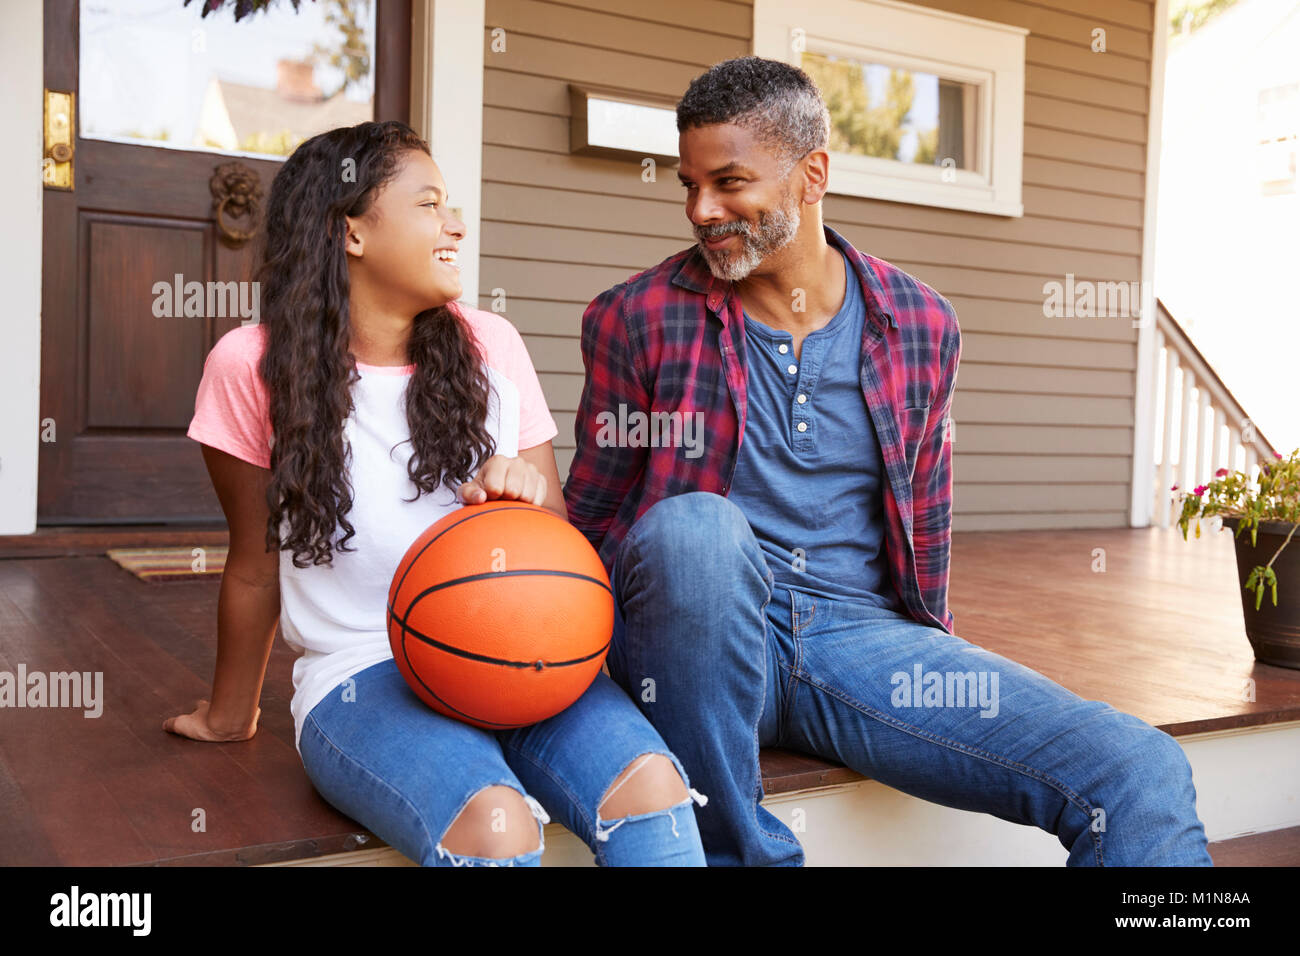 Father And Daughter Discussing Basketball On Porch Of Home Stock Photo